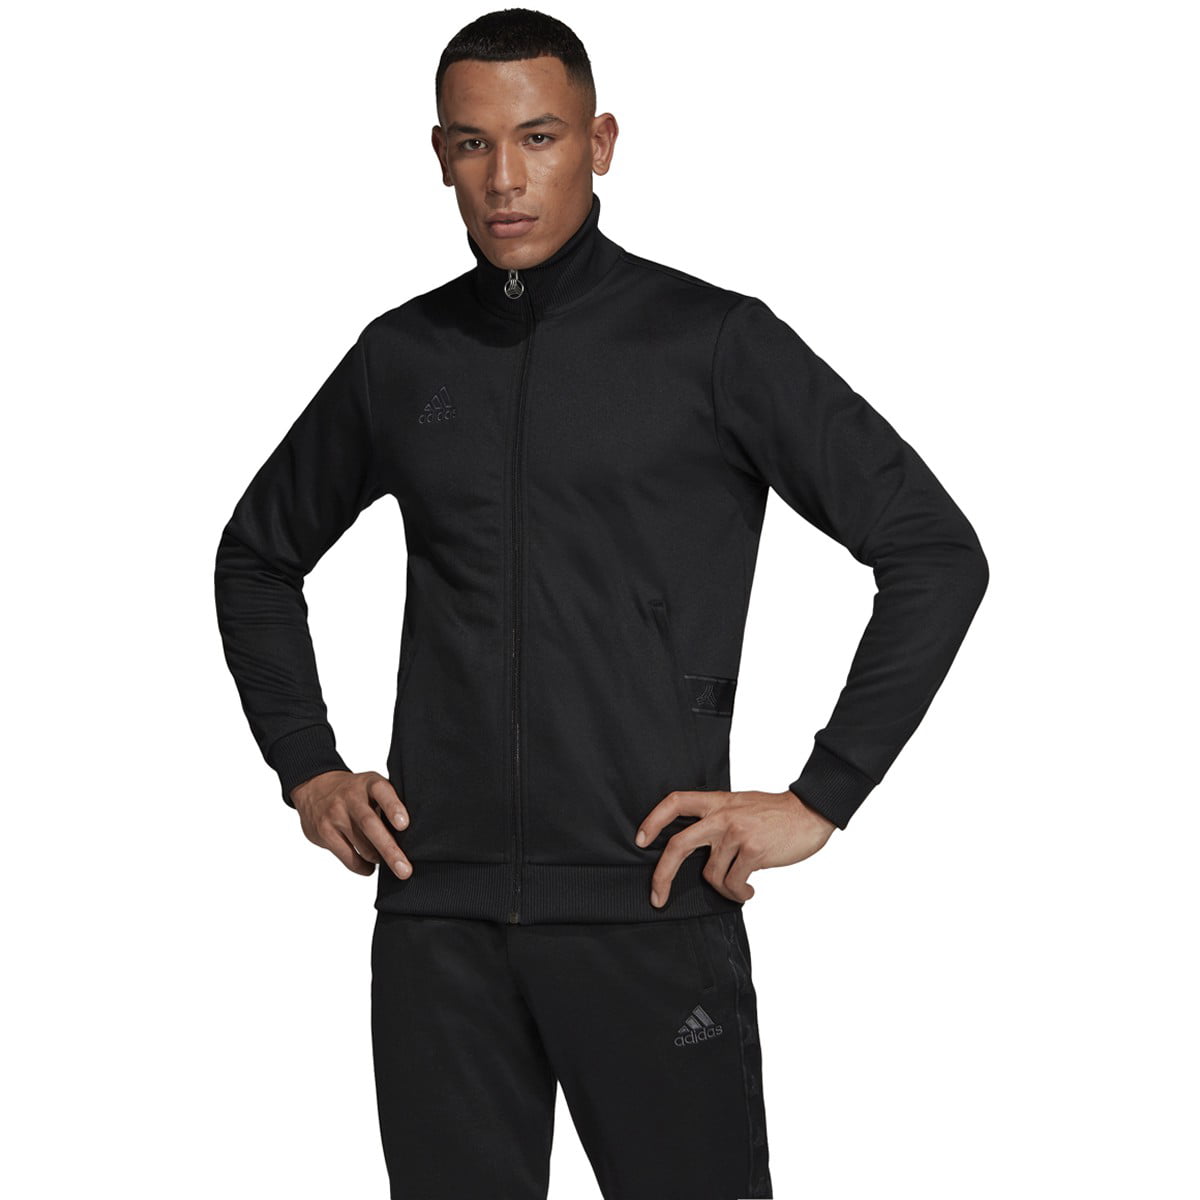 Men's Tango Soccer Football Track DY5826 Black-Small,Med,Large,2XL -